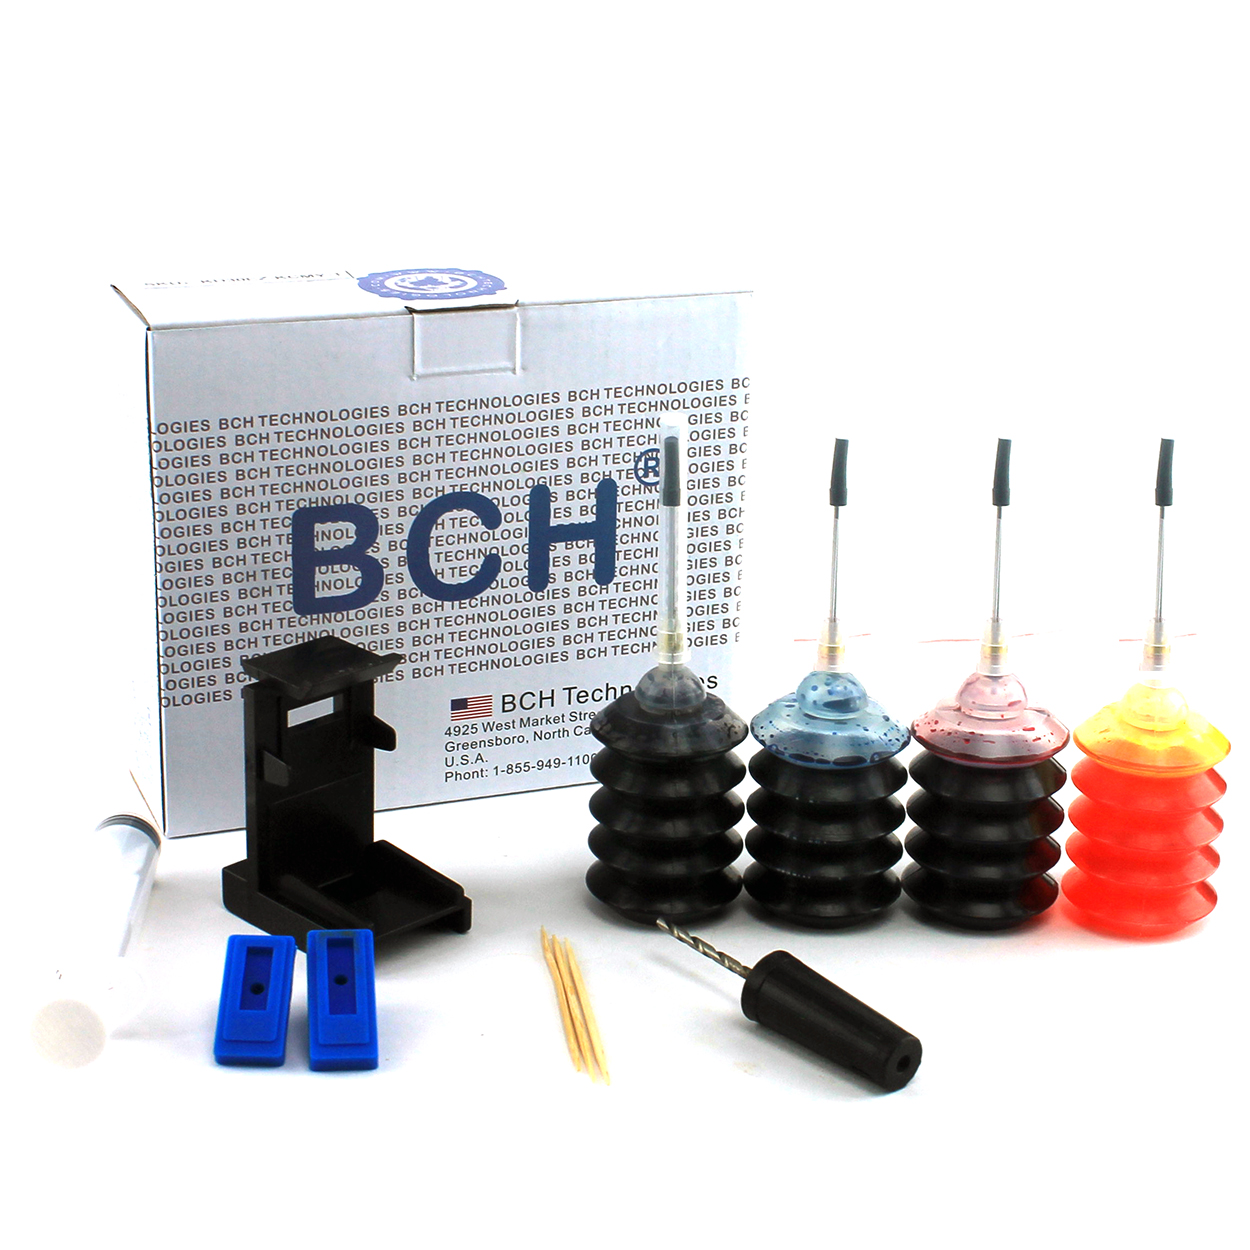 BCH First-Timer Printer Ink Refill Kit for 21, 56, 60, 61, 62, 65, 74, 75, 93, 95, 96, 97, 901 - 1 pack of EZ30-T - image 3 of 4